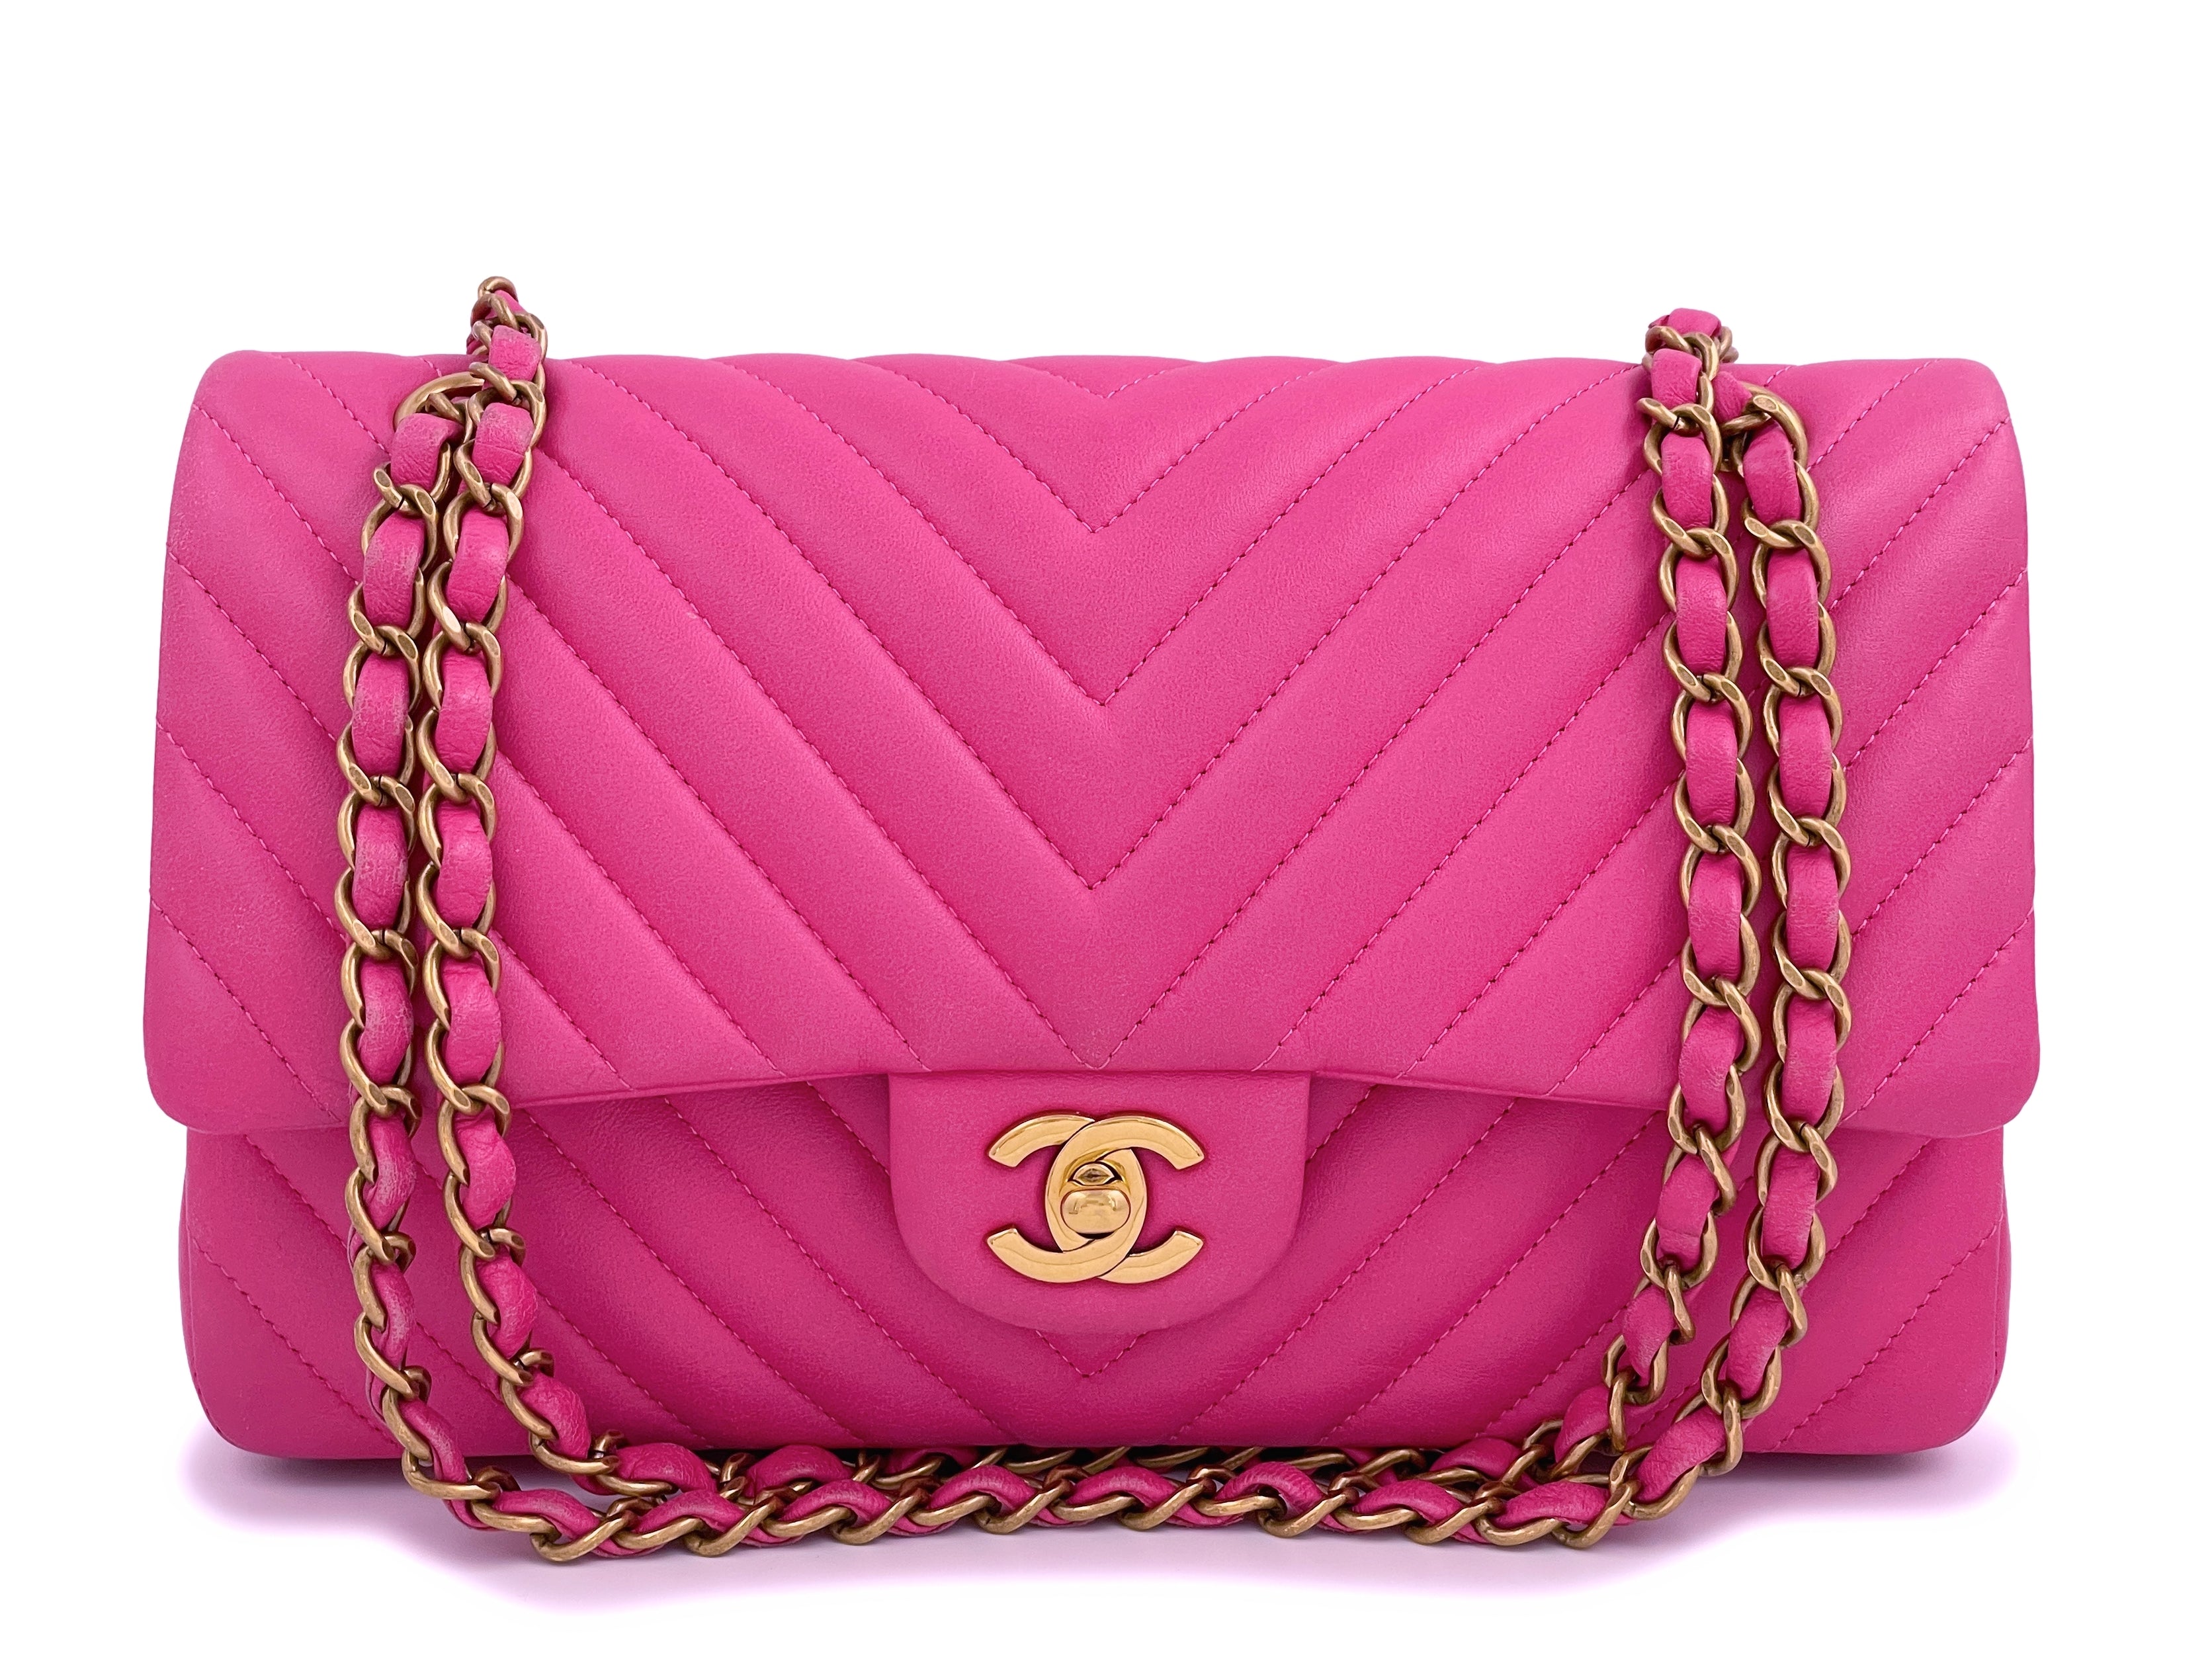 Chanel Pink Chevron Quilted Lambskin Leather Mini Flap Bag., Lot #58022